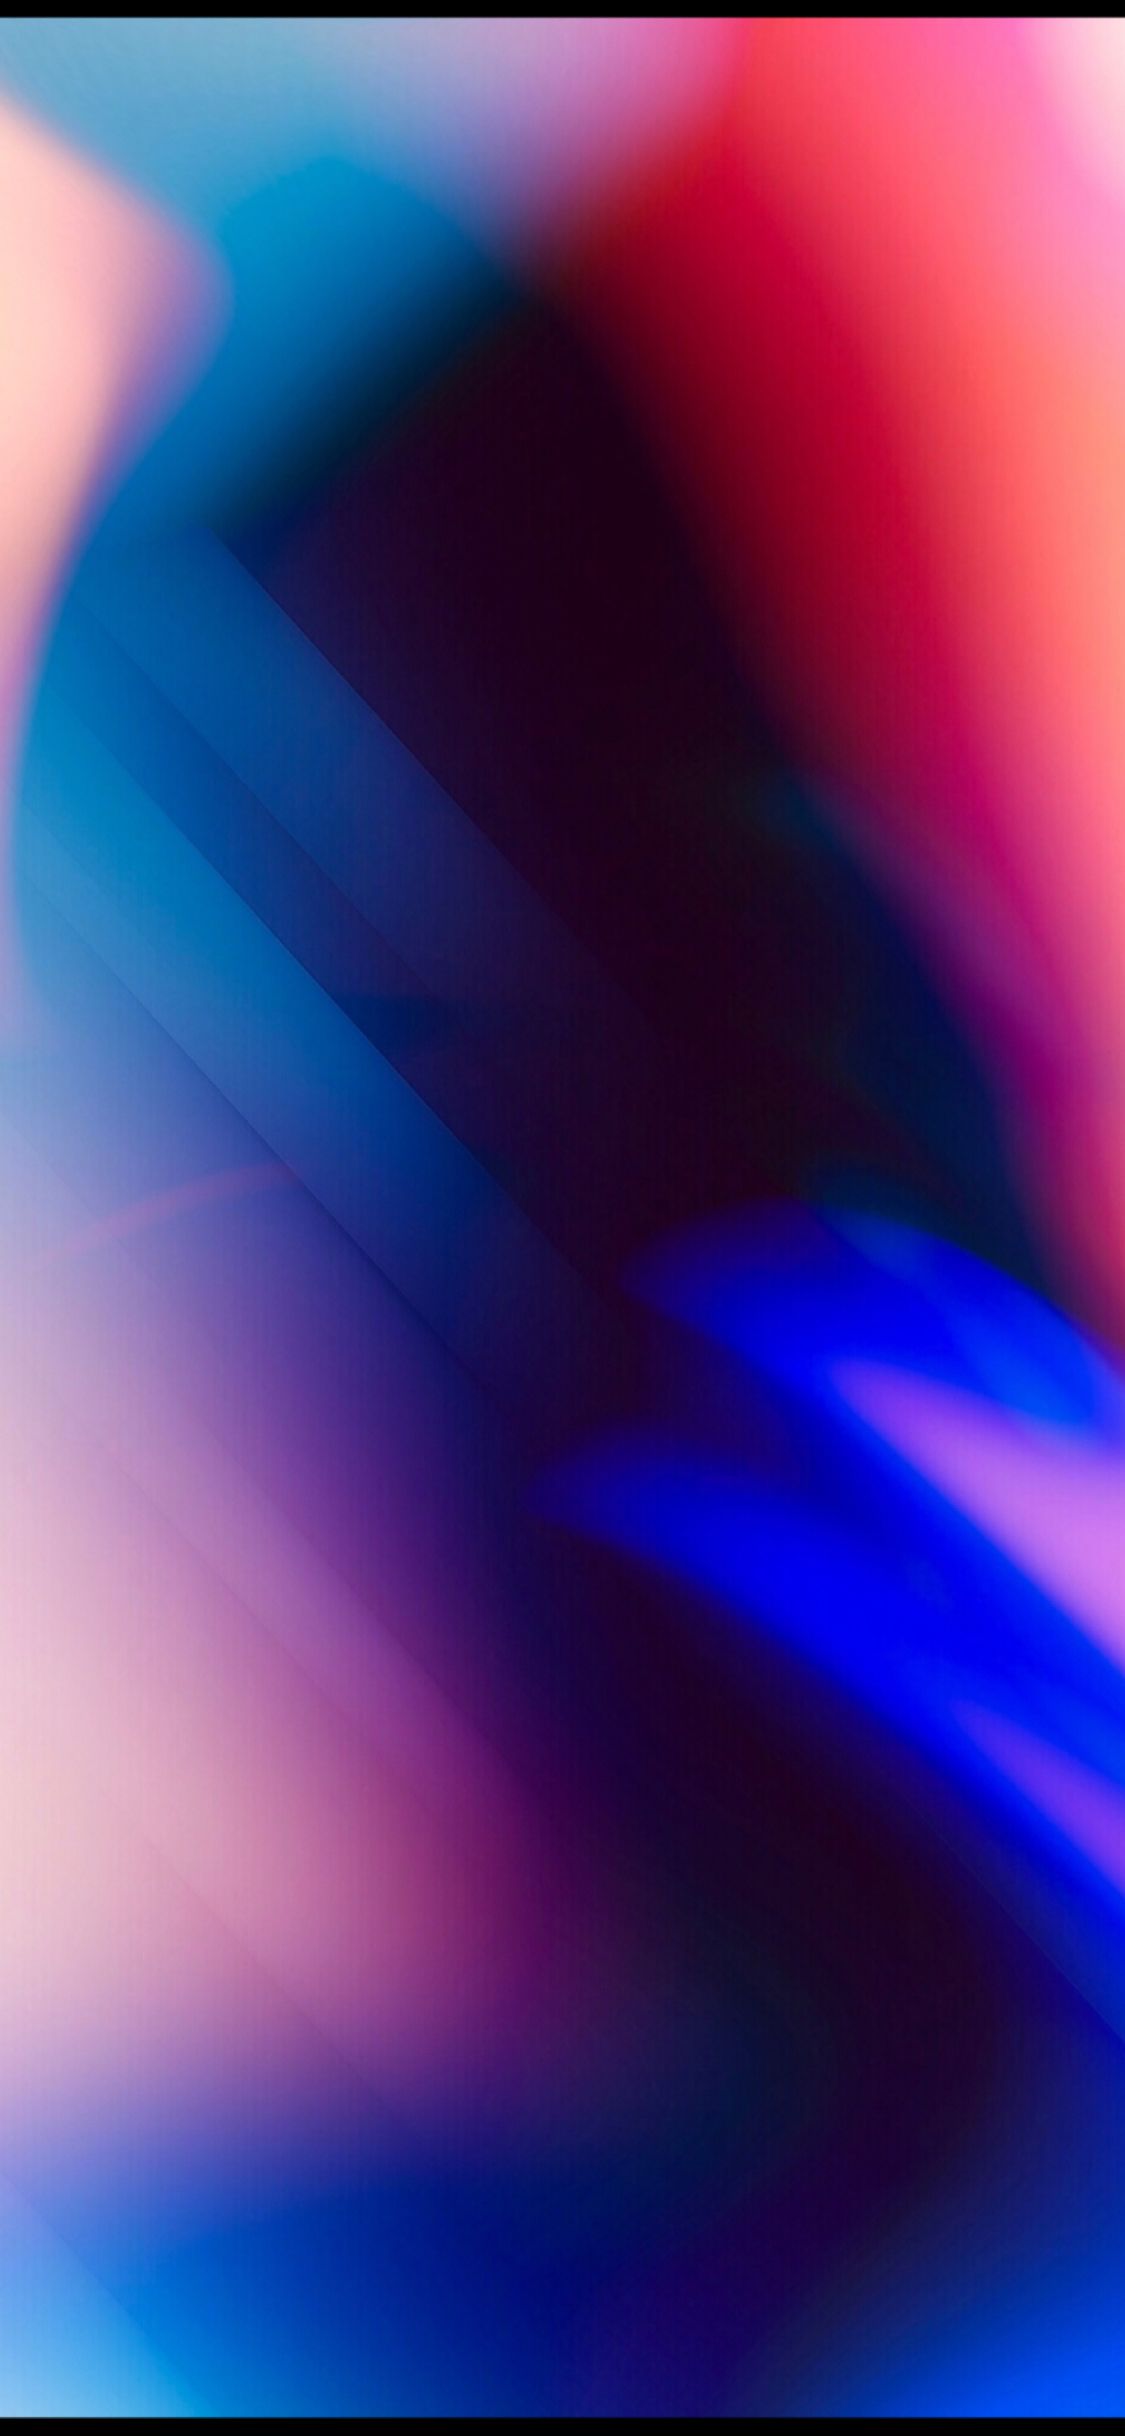 A blur of blue and red light. Abstract iphone wallpaper, Cool